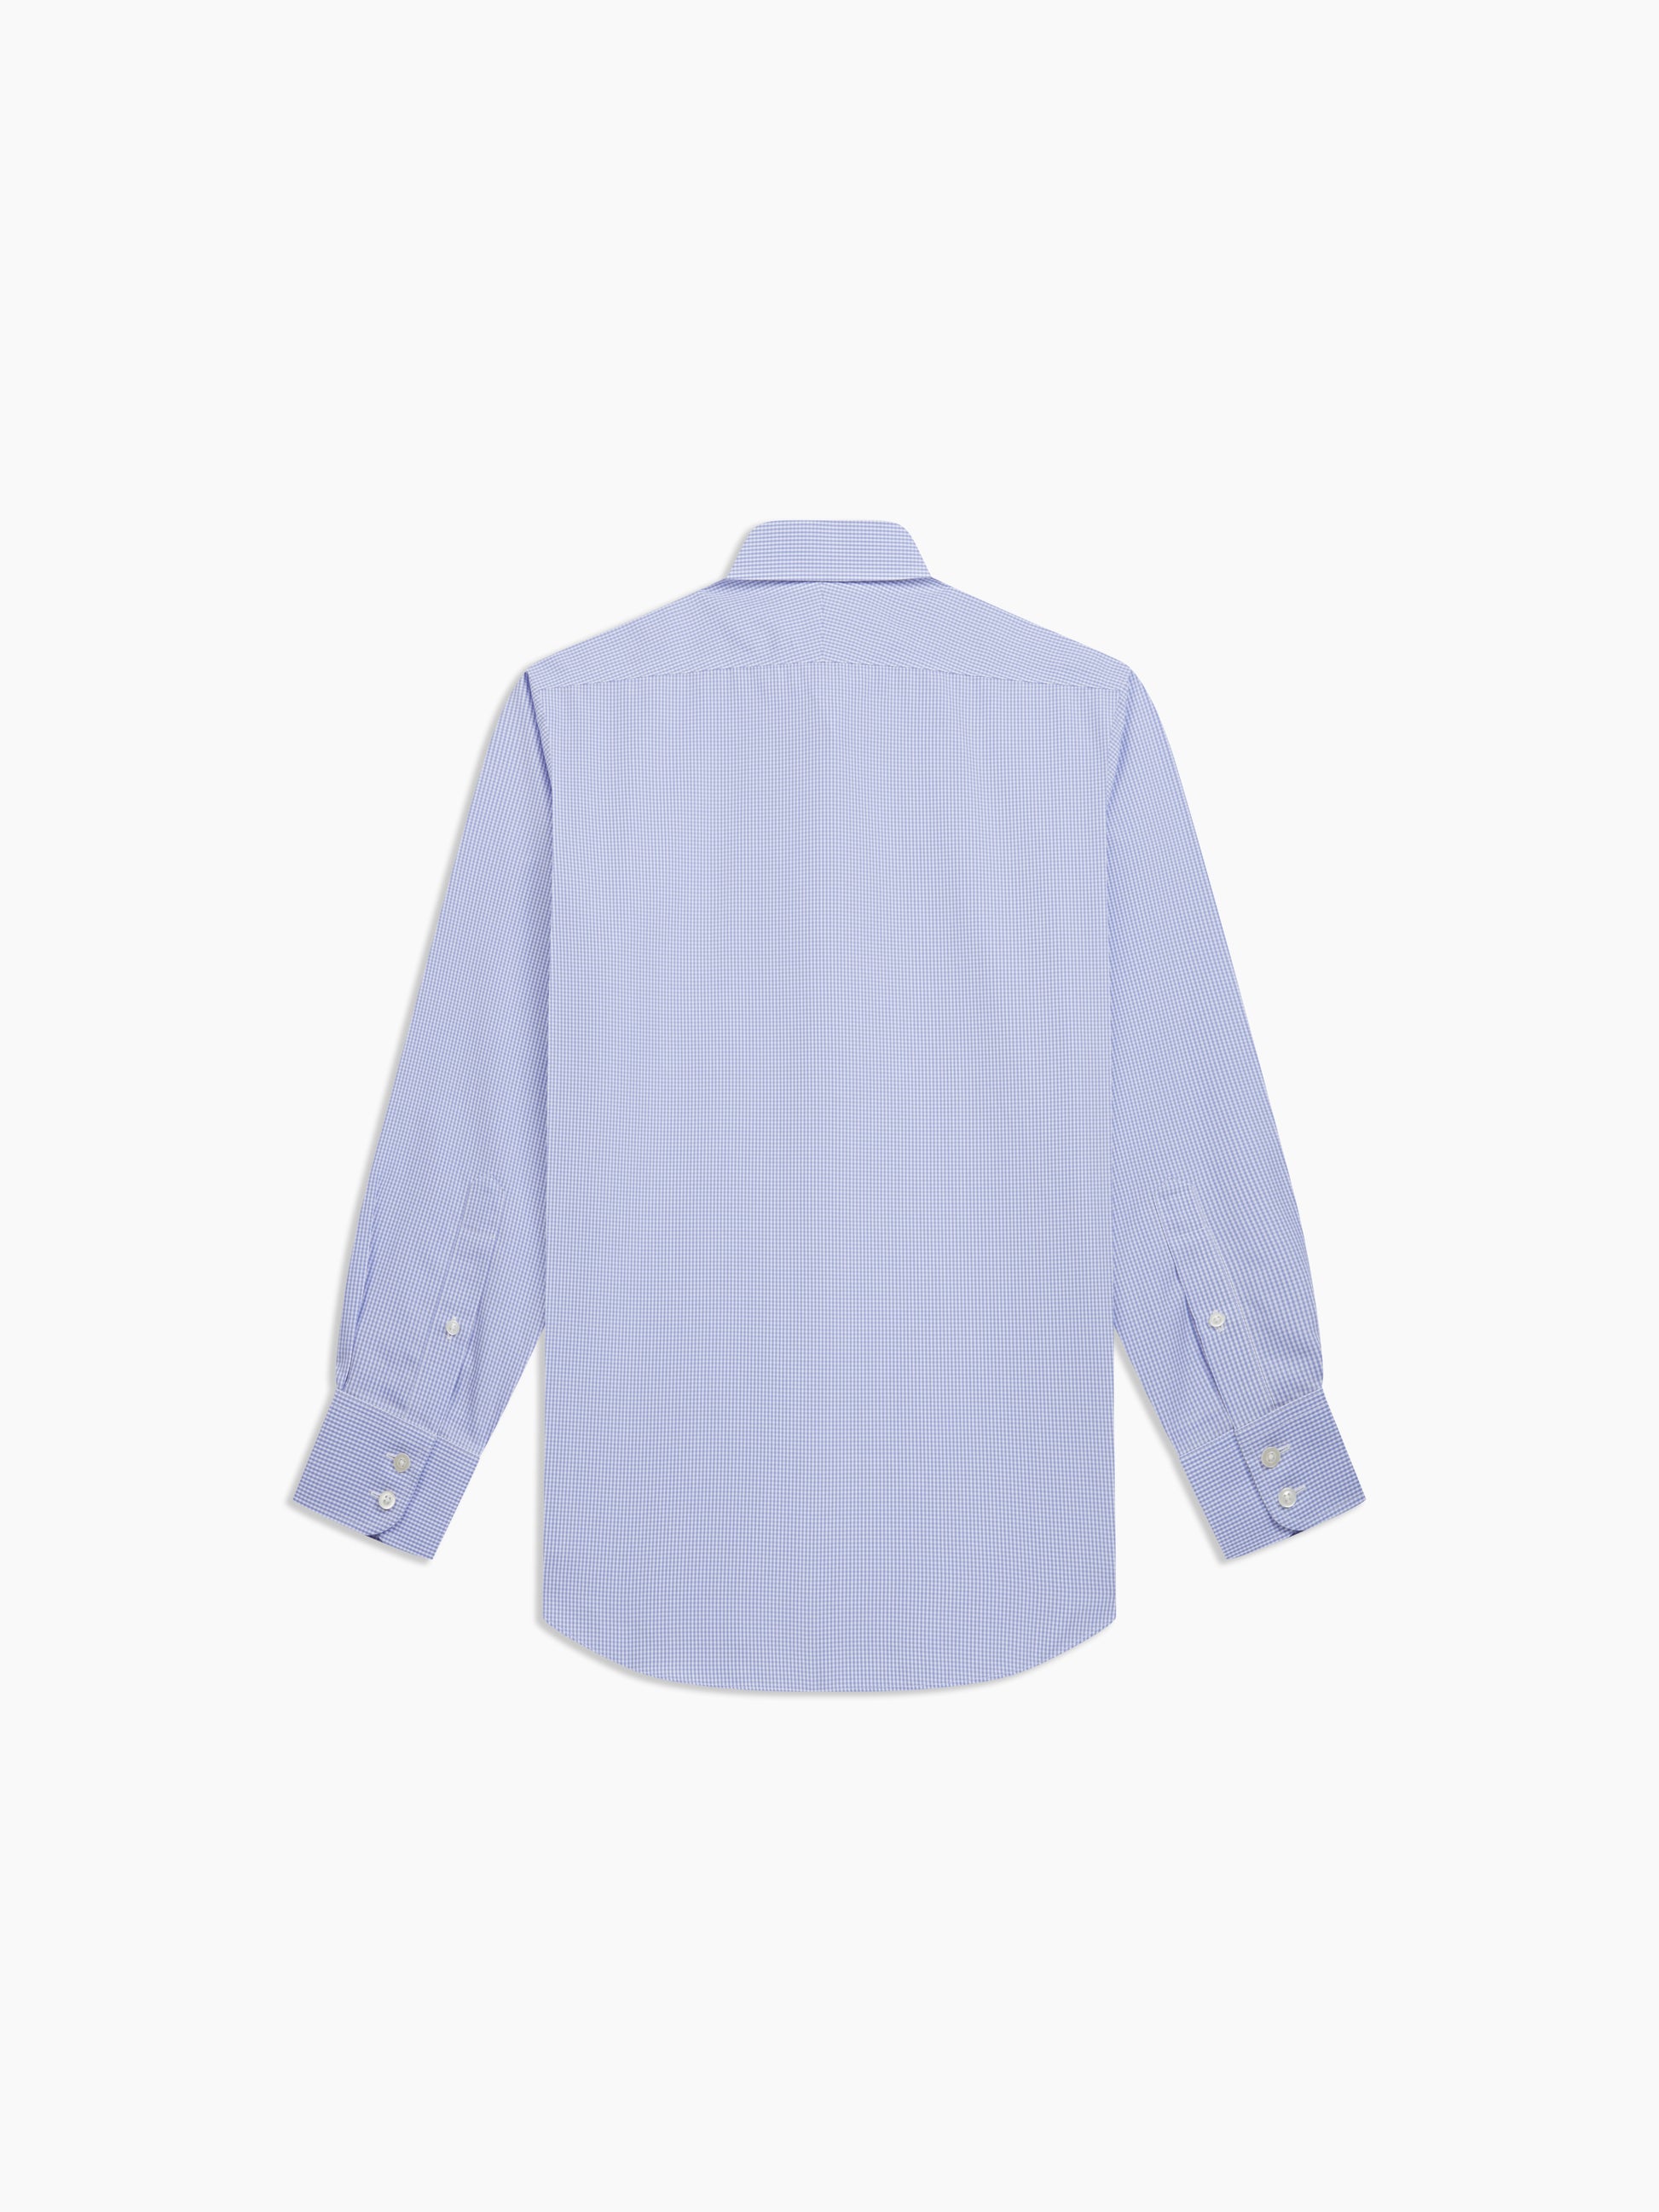 Image 4 of Non-Iron Light Blue Gingham Dobby Fitted Single Cuff Classic Collar Shirt